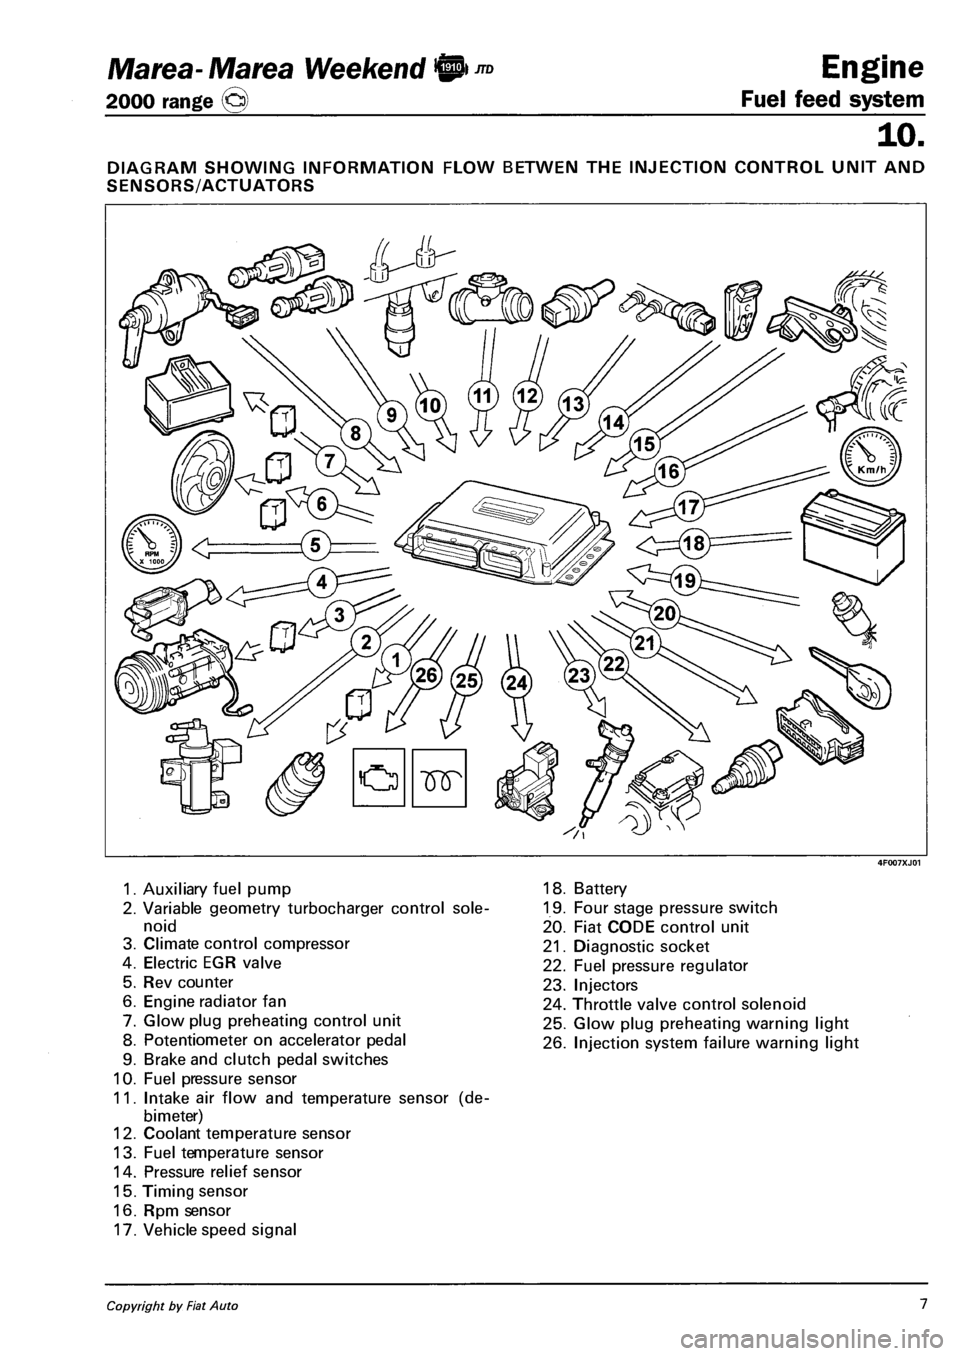 FIAT MAREA 2000 1.G User Guide Marea- Marea Weekend 9 ™ 
2000 range © 
Engine 
Fuel feed system 
10. 
DIAGRAM SHOWING INFORMATION FLOW BETWEN THE INJECTION CONTROL UNIT AND 
SENSORS/ACTUATORS 
1. Auxiliary fuel pump 
2. Variable